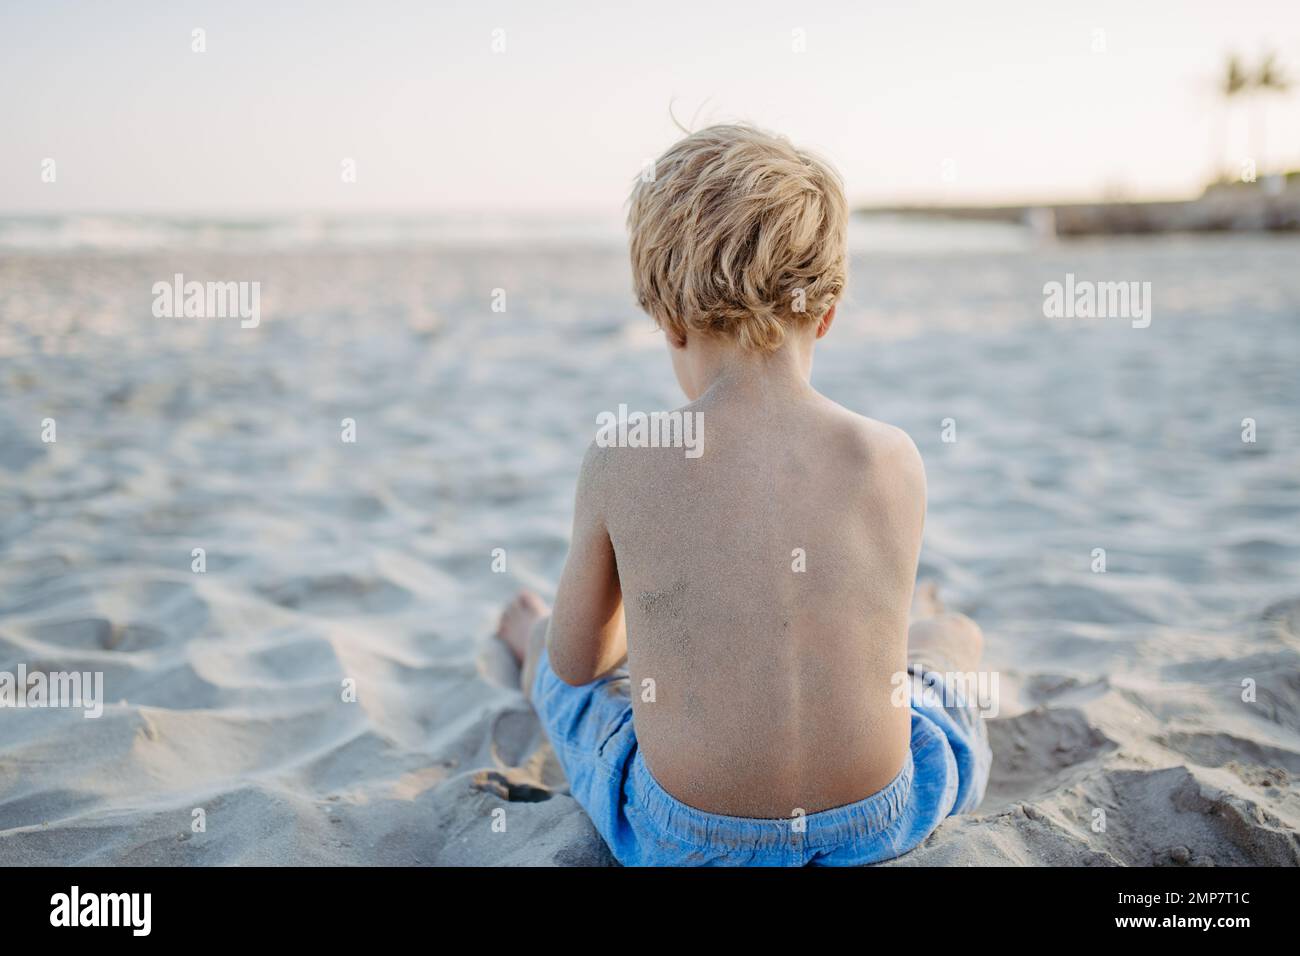 Little boy playing on the beach, rear view. Stock Photo